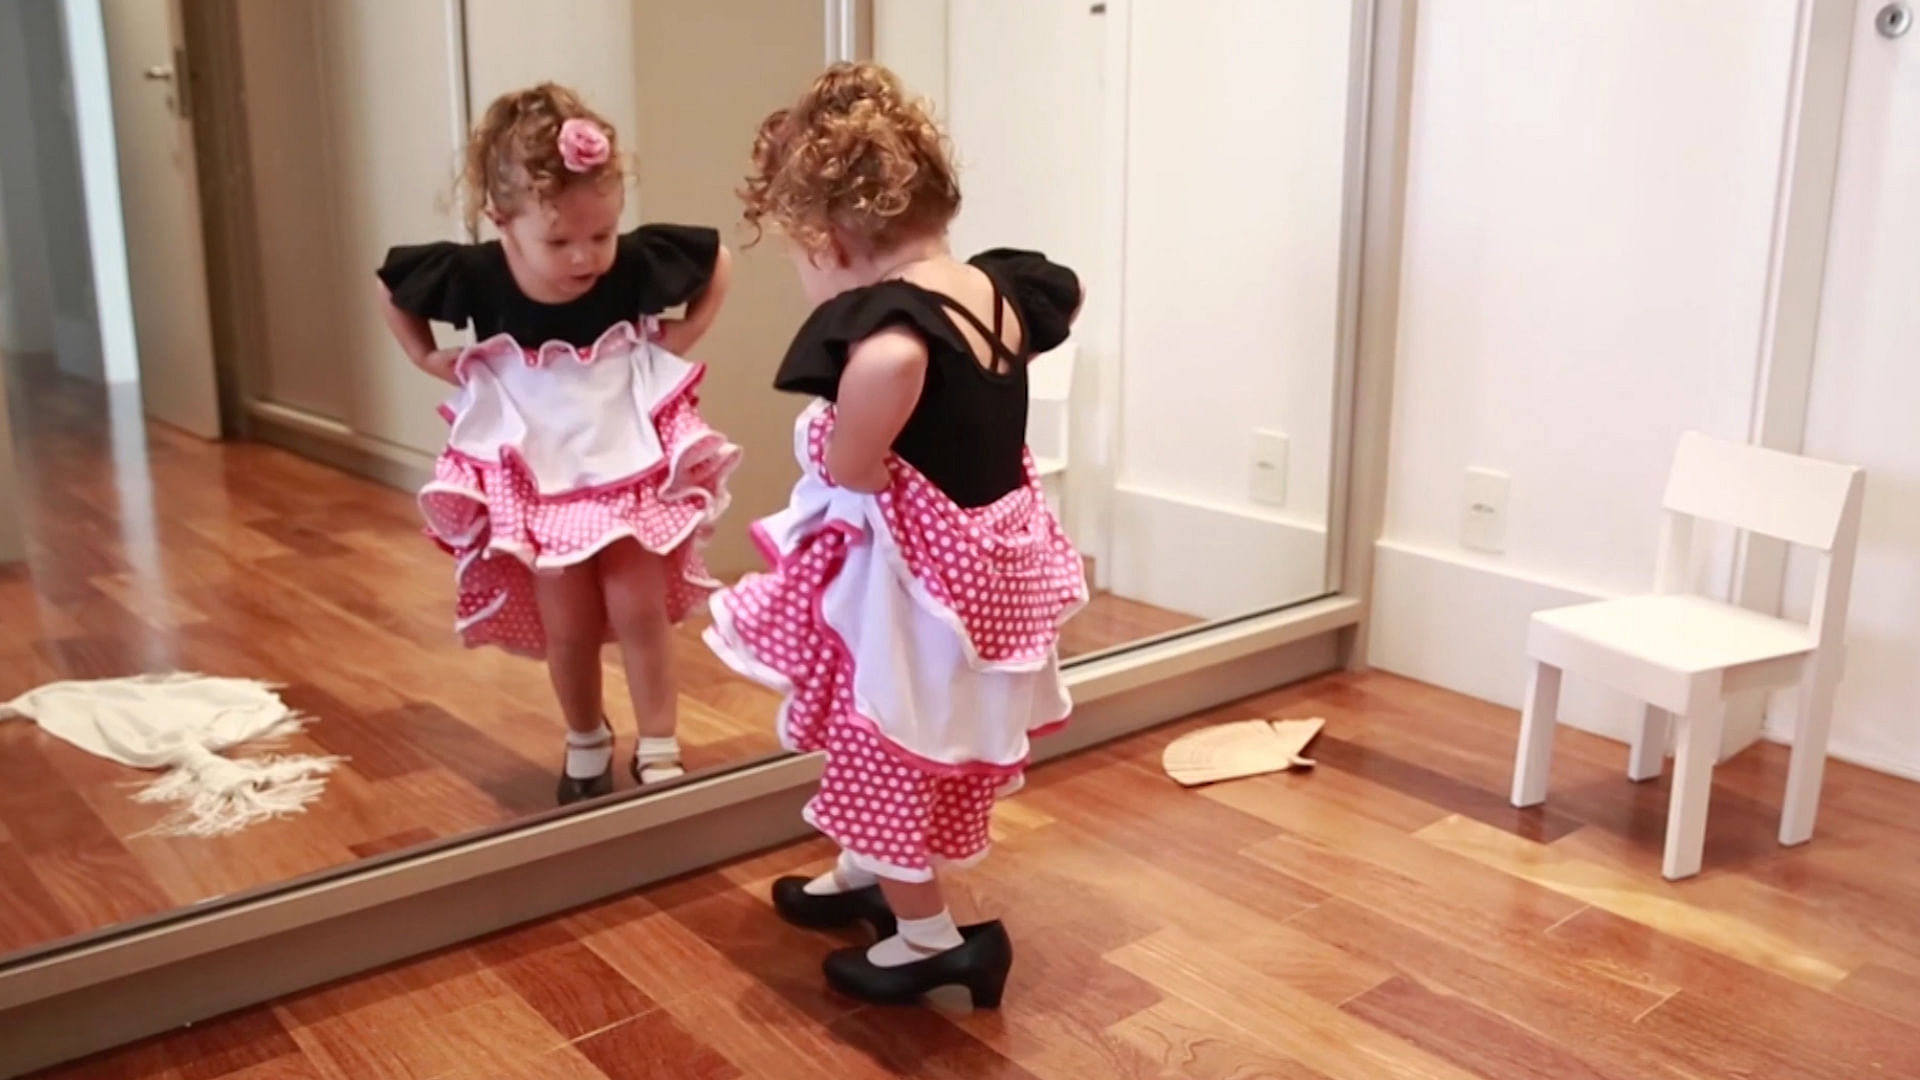 

Gigi Valenti from Brazil, borrows her mother’s shoes and ‘dances everywhere in the house’ - and loves dressing up in the skirt. (Photo Courtesy: AP Videograb)